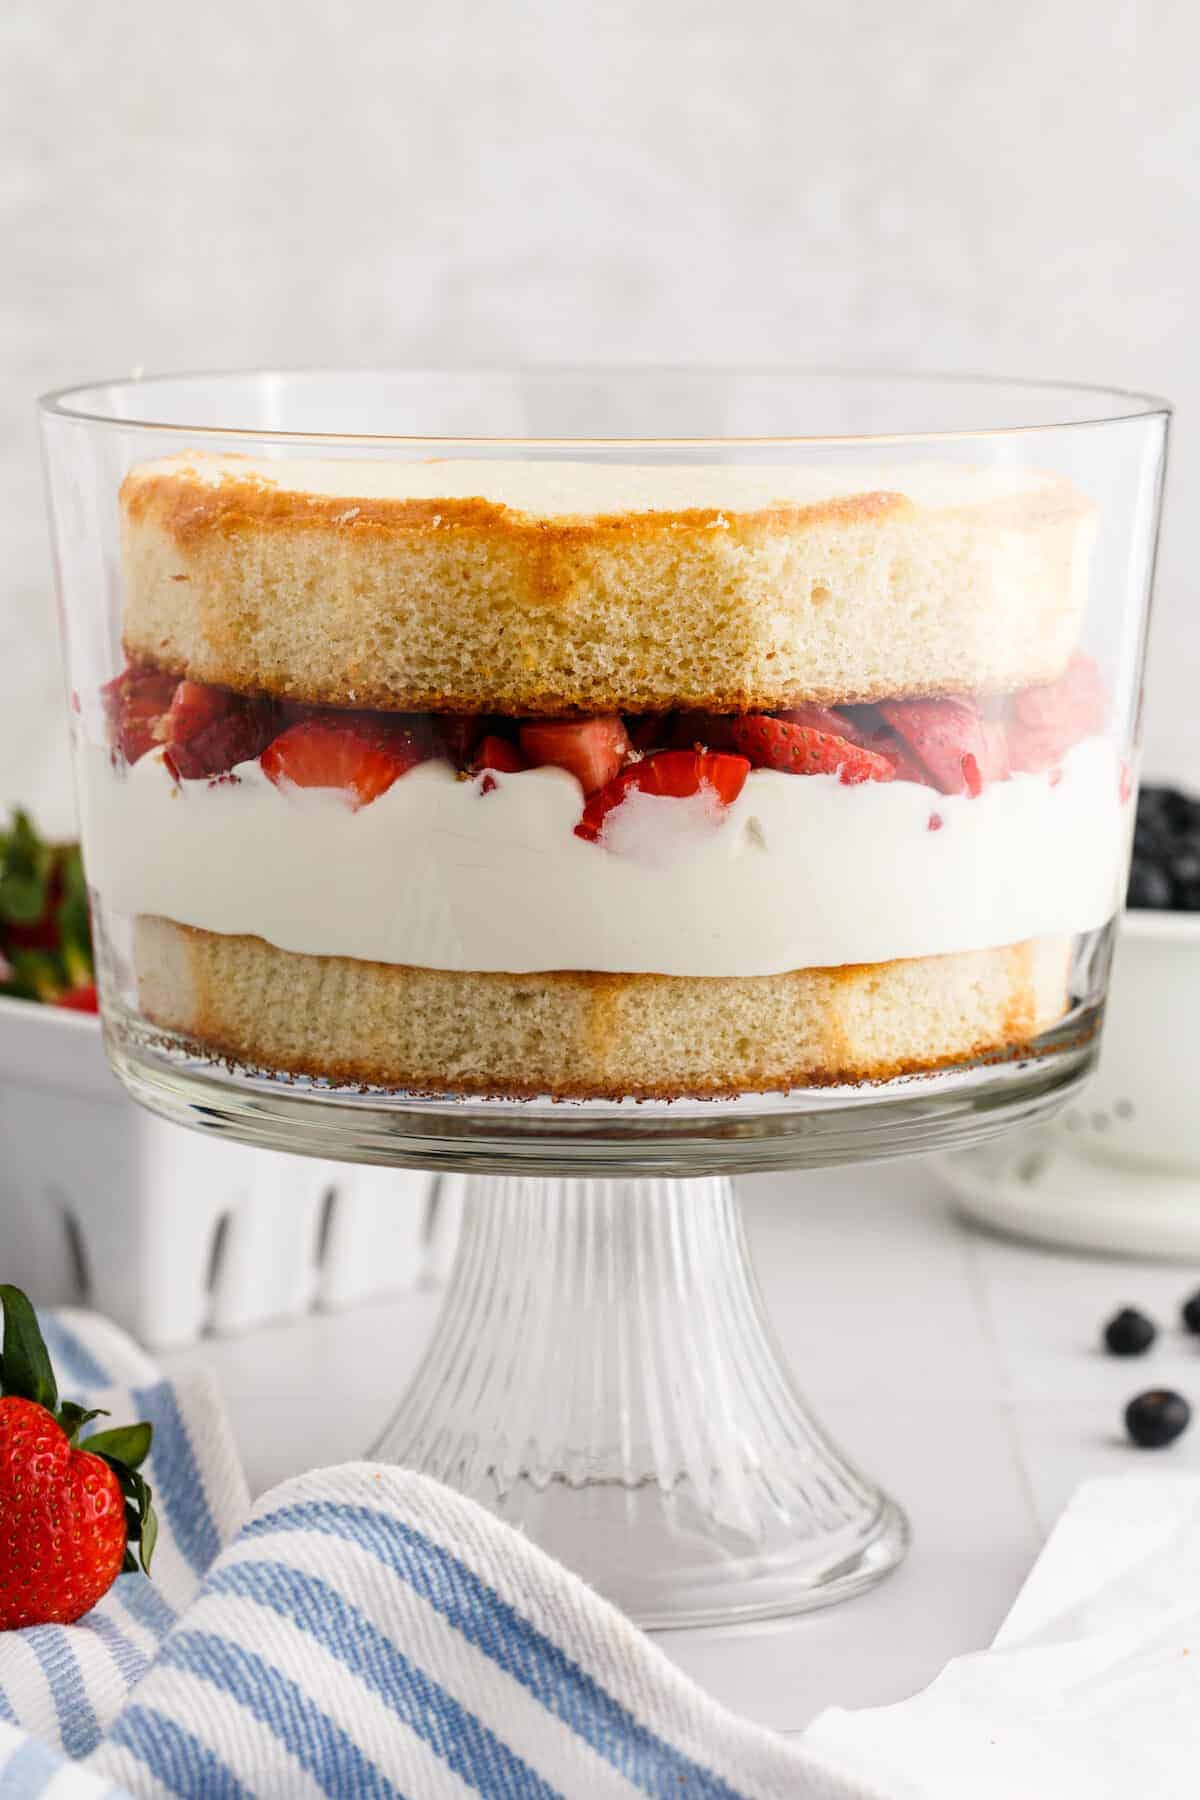 second cake layered on top of the fresh strawberries.